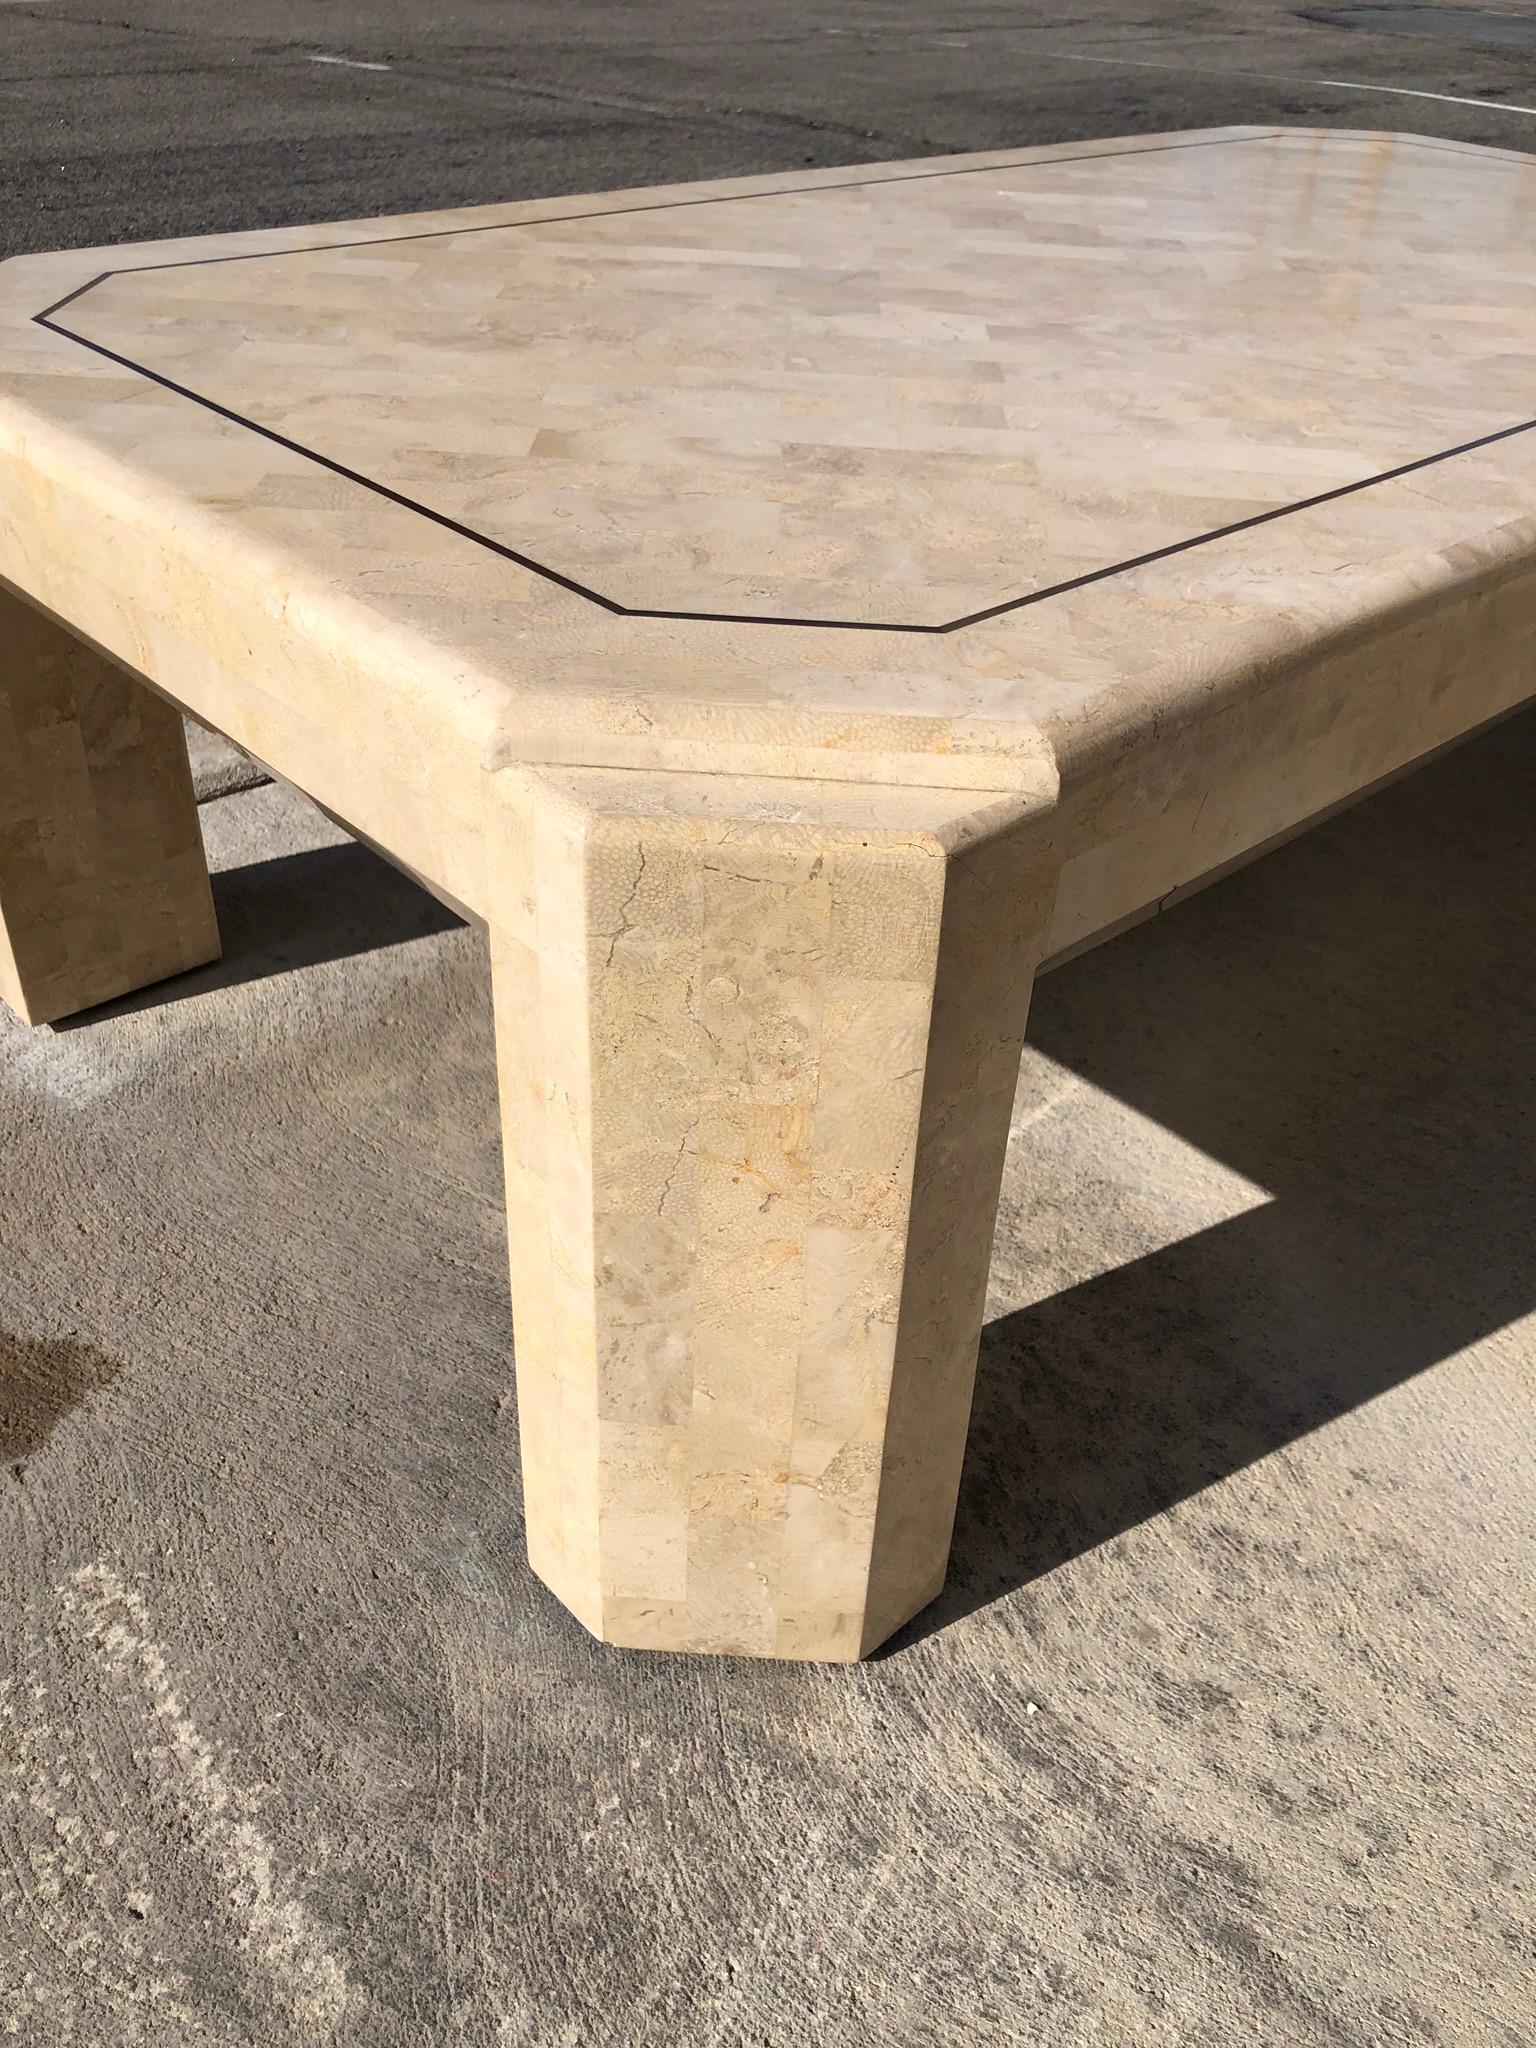 fossil stone table